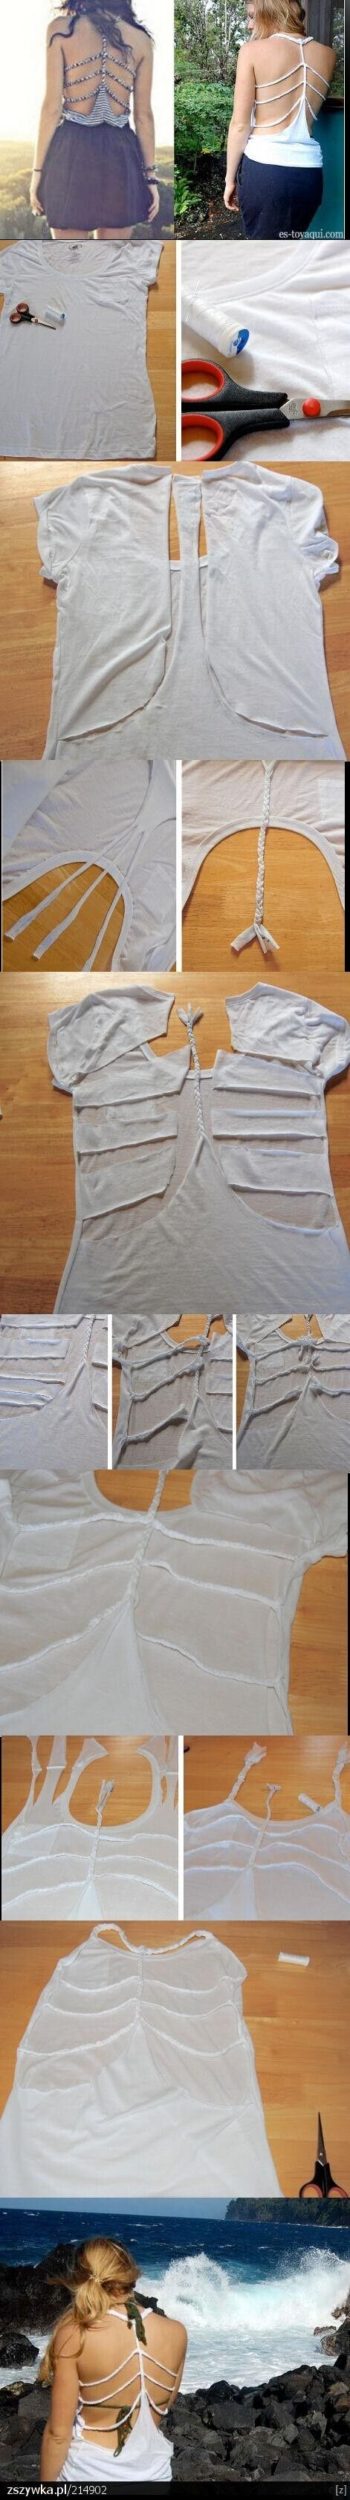 How To Redesign Old Clothes During Your Corona Virus Self Isolation